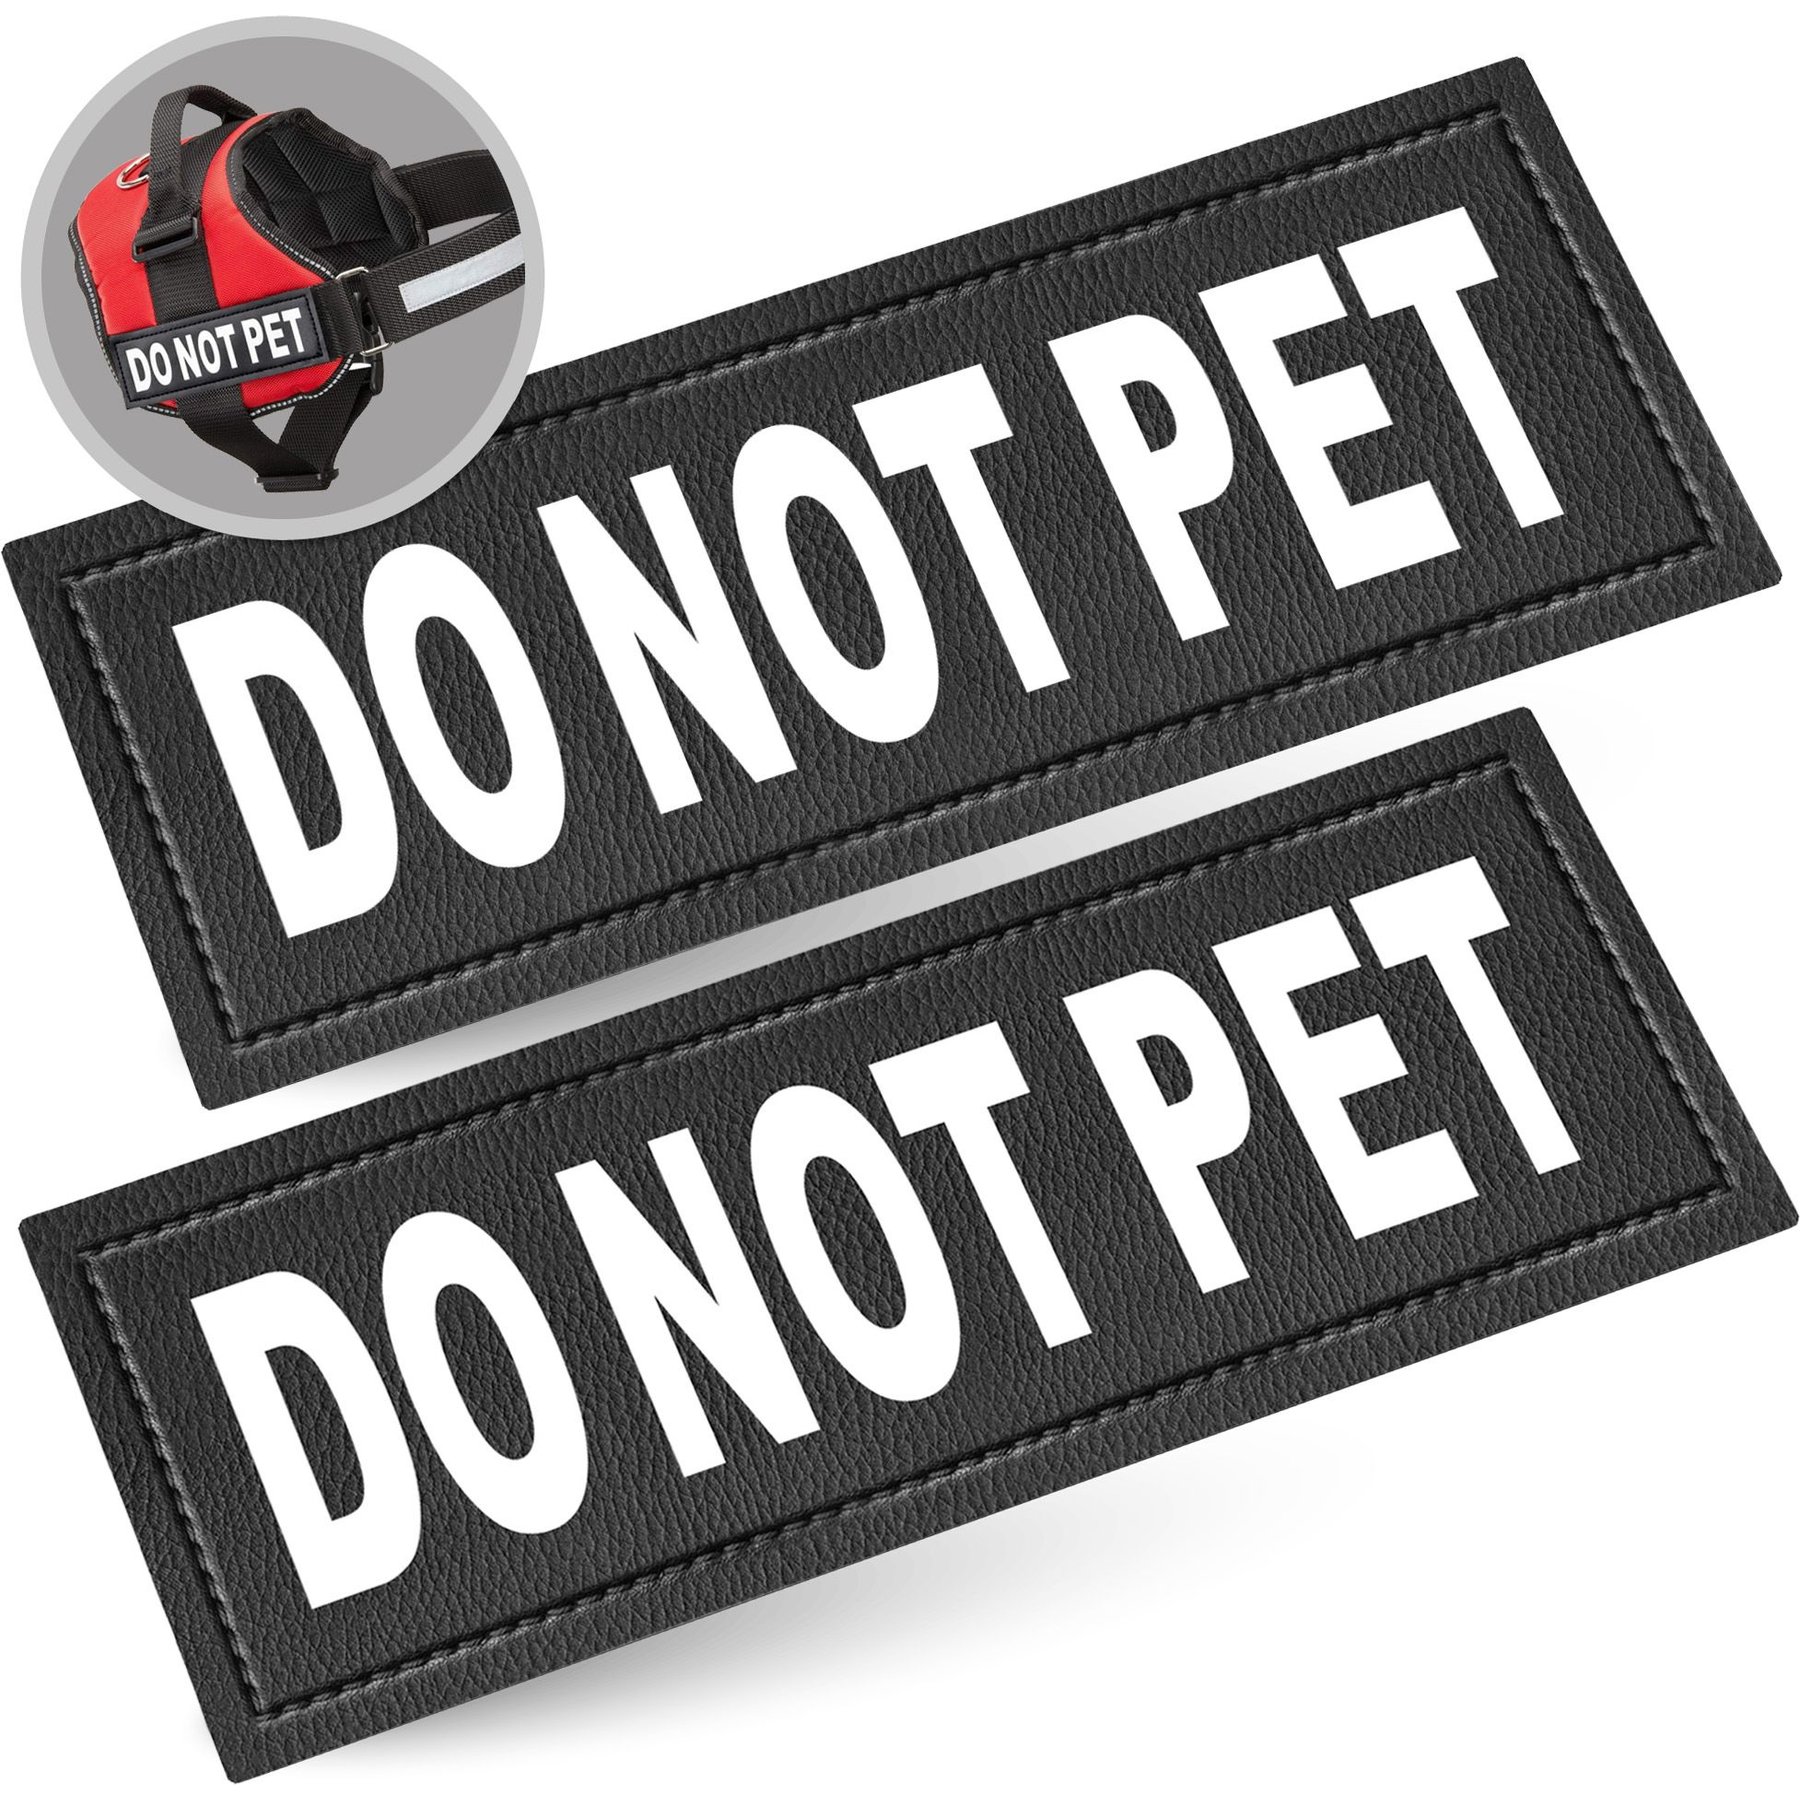 ASK TO PET Patch Reflective Extra Label Tag for Dog Harness Service